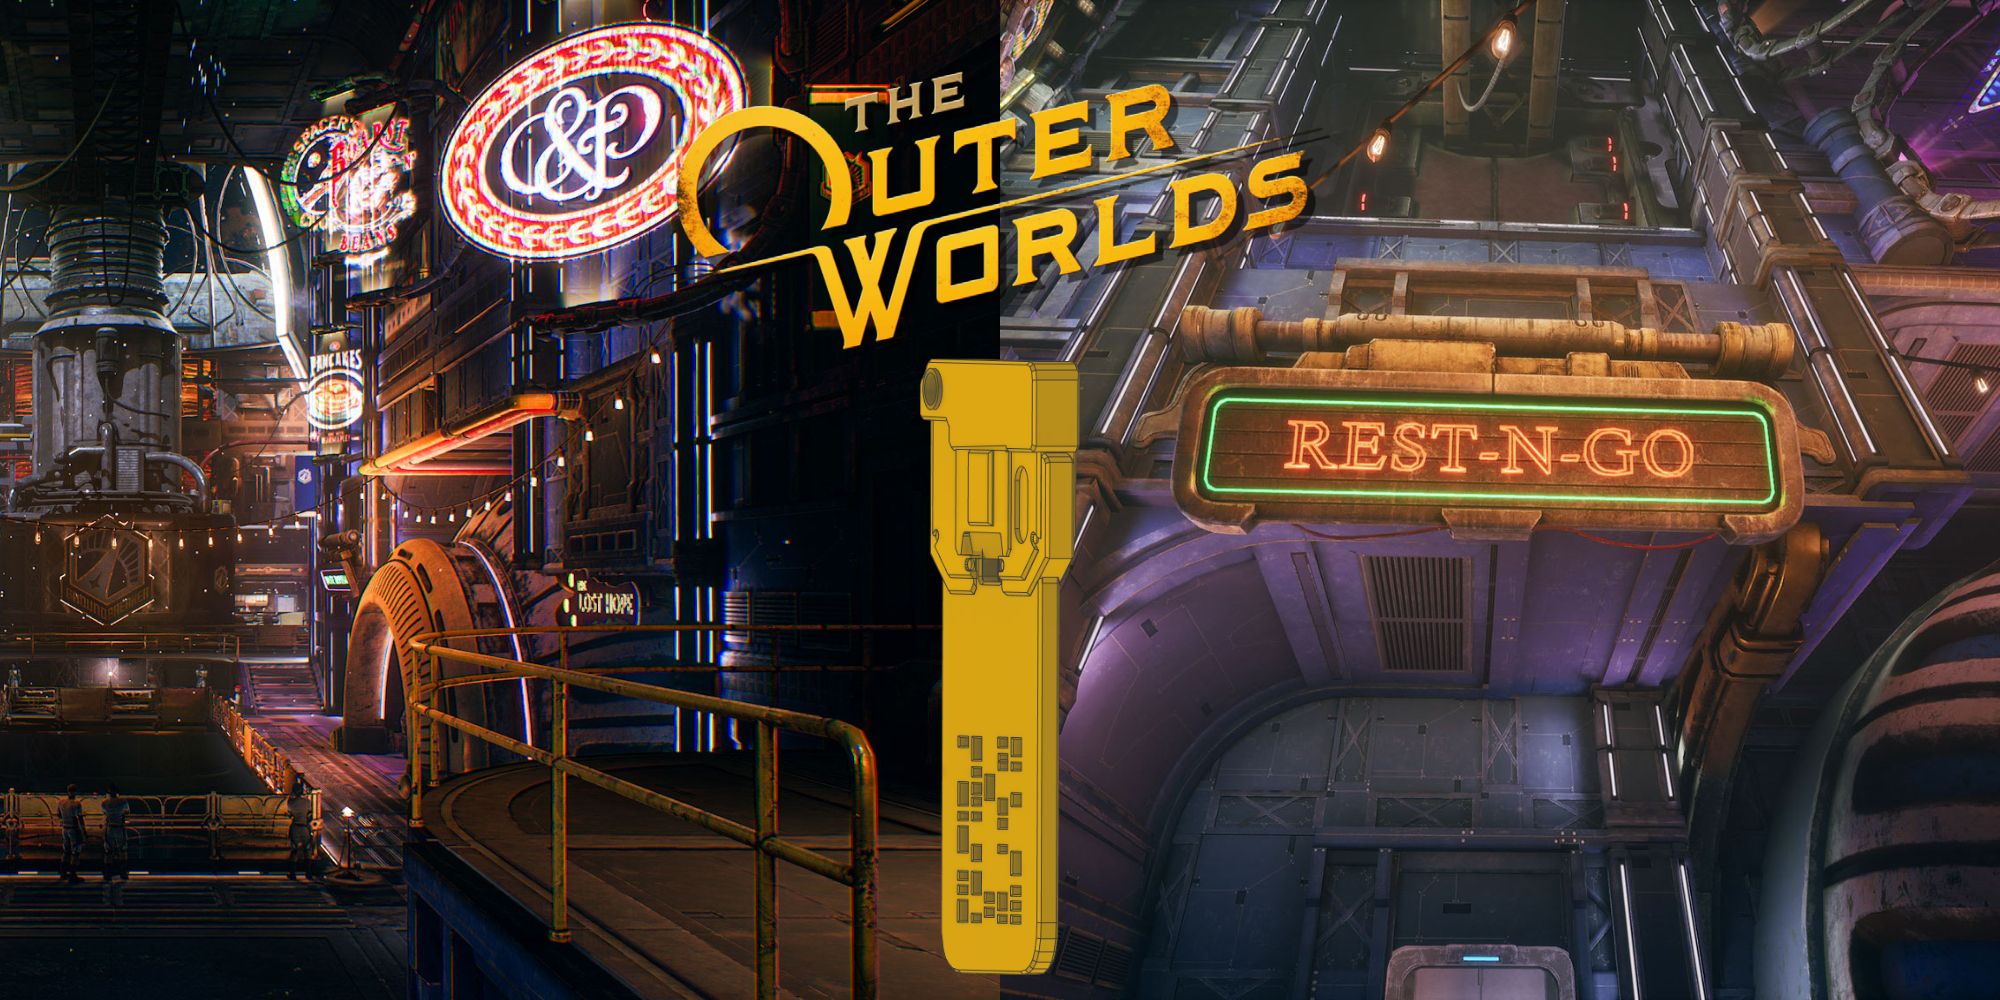 Outer Worlds Where To Find All The RestNGo Keycards